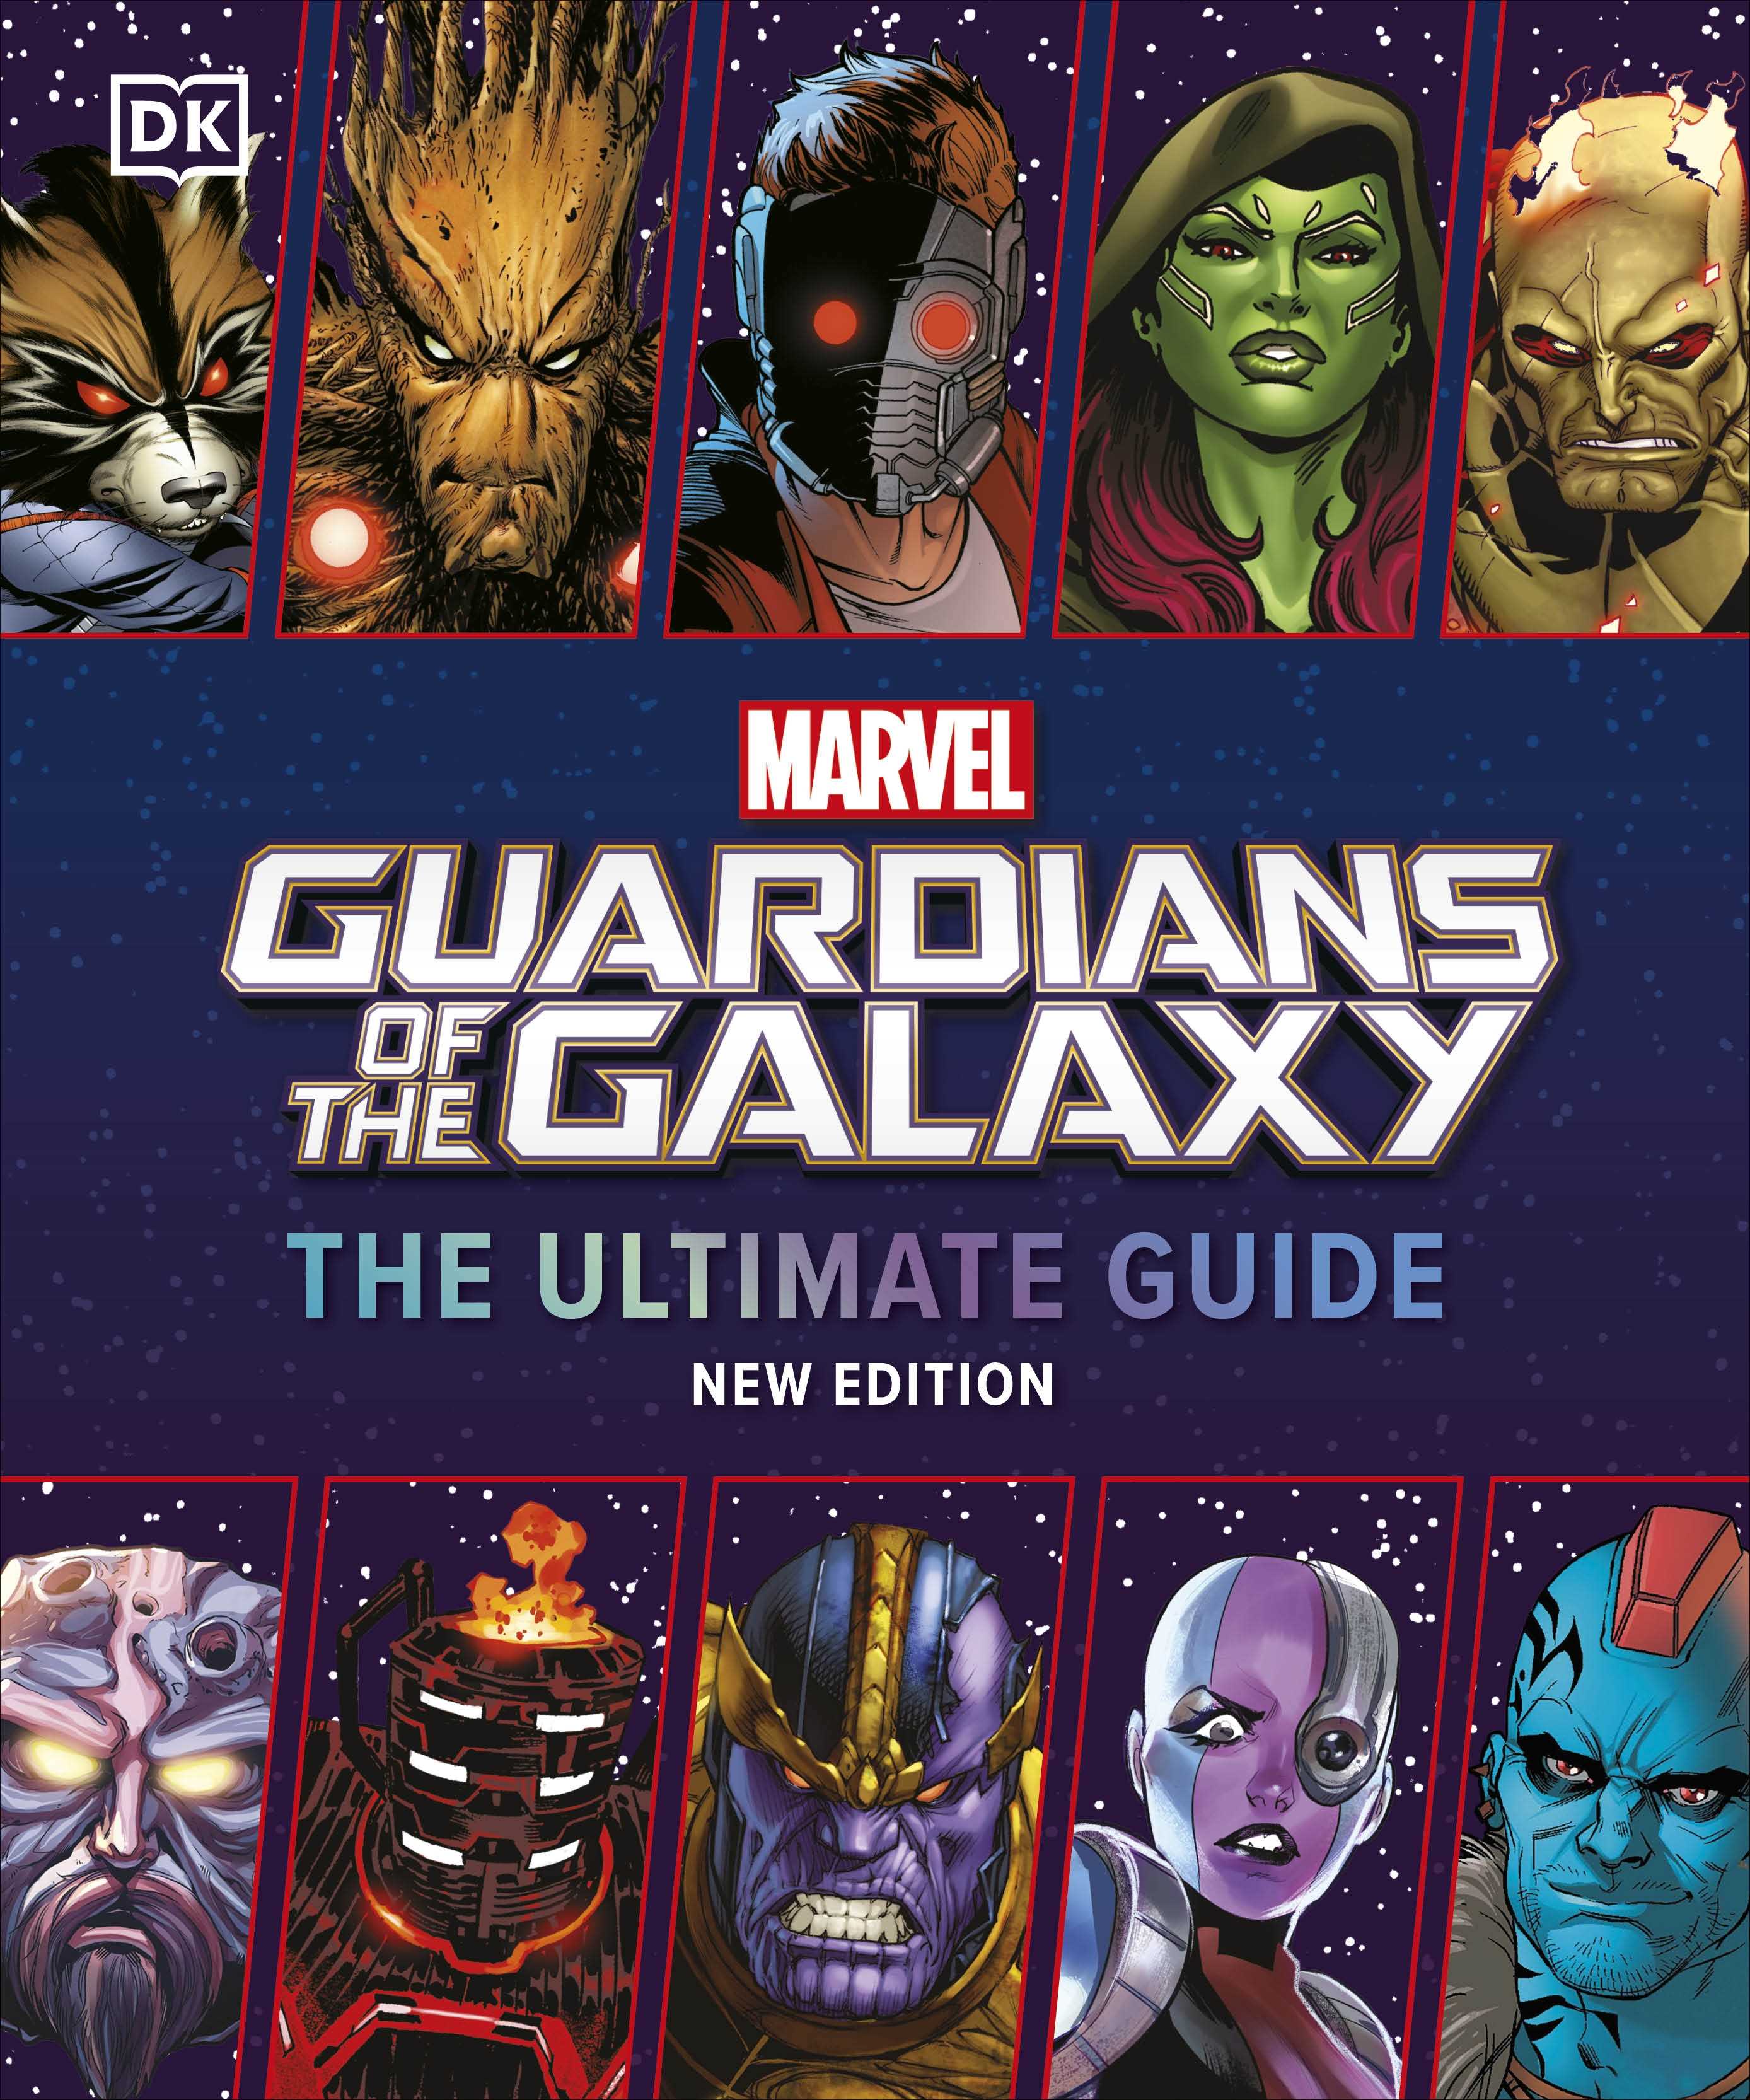 Marvel Guardians of the Galaxy The Ultimate Guide (New Edition)